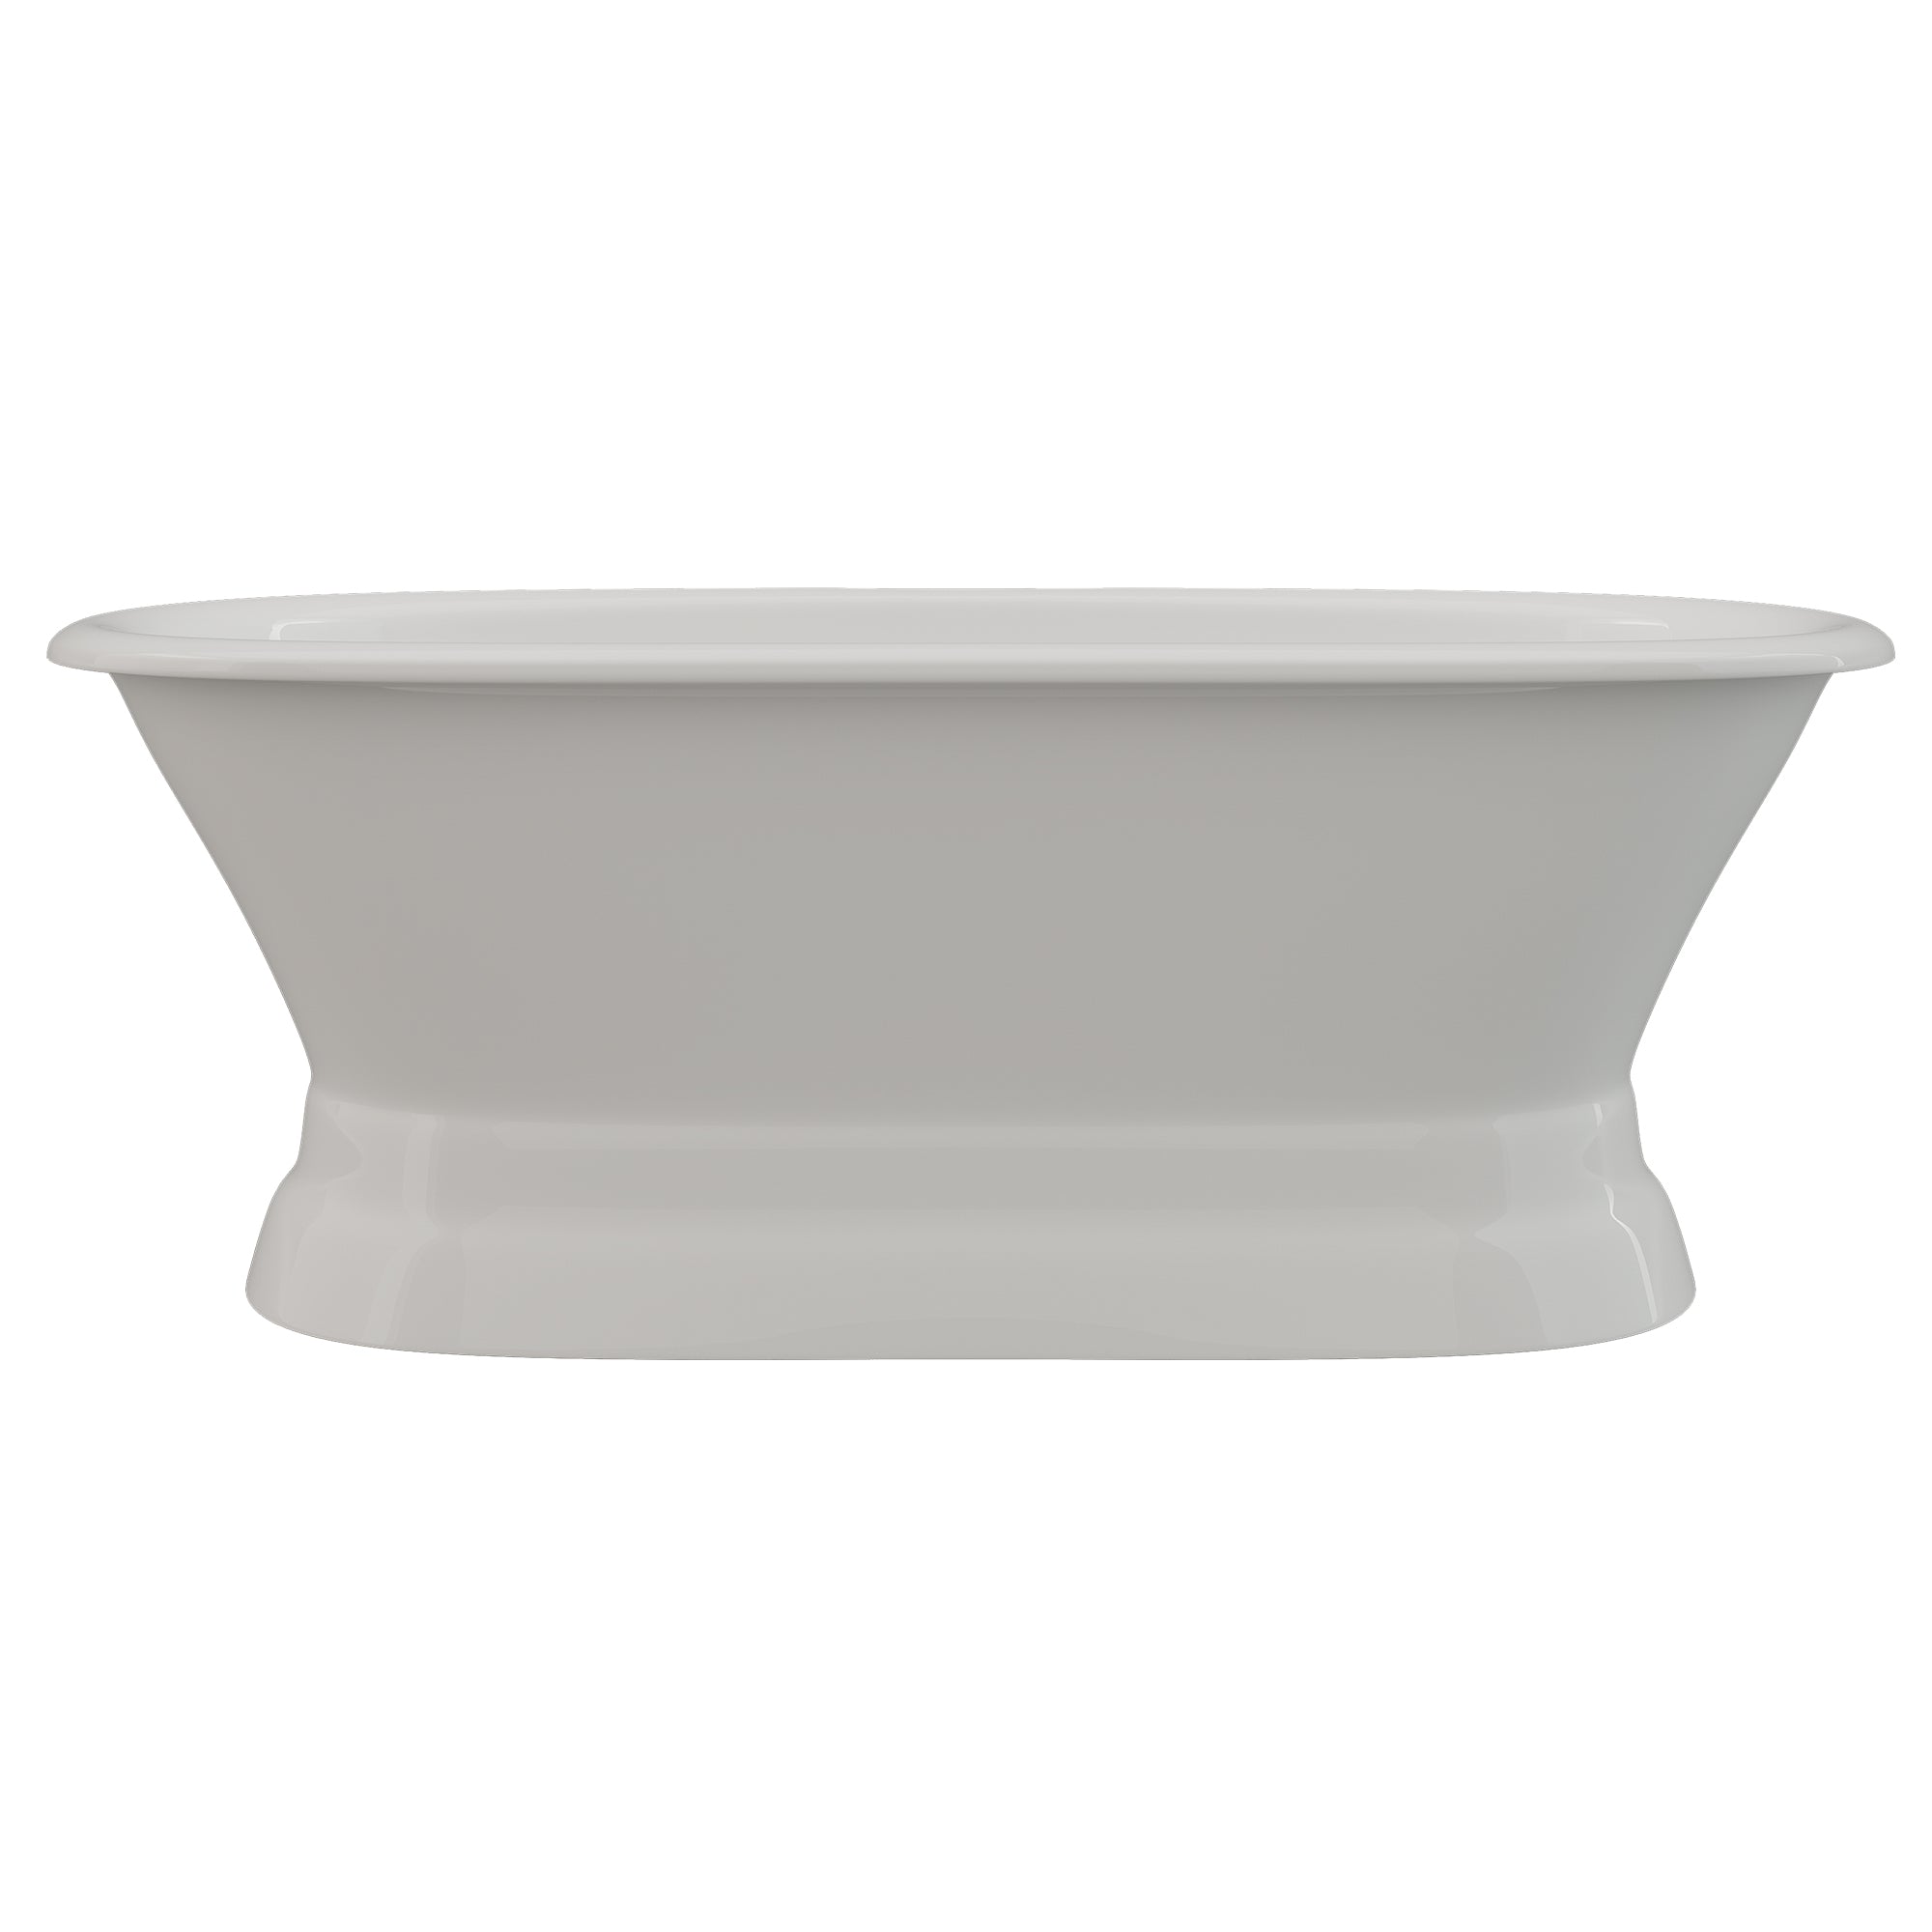 Cambridge Plumbing 66-Inch Cast Iron Pedestal Soaking Tub with Faucet Holes DE66-PED-NH - Vital Hydrotherapy